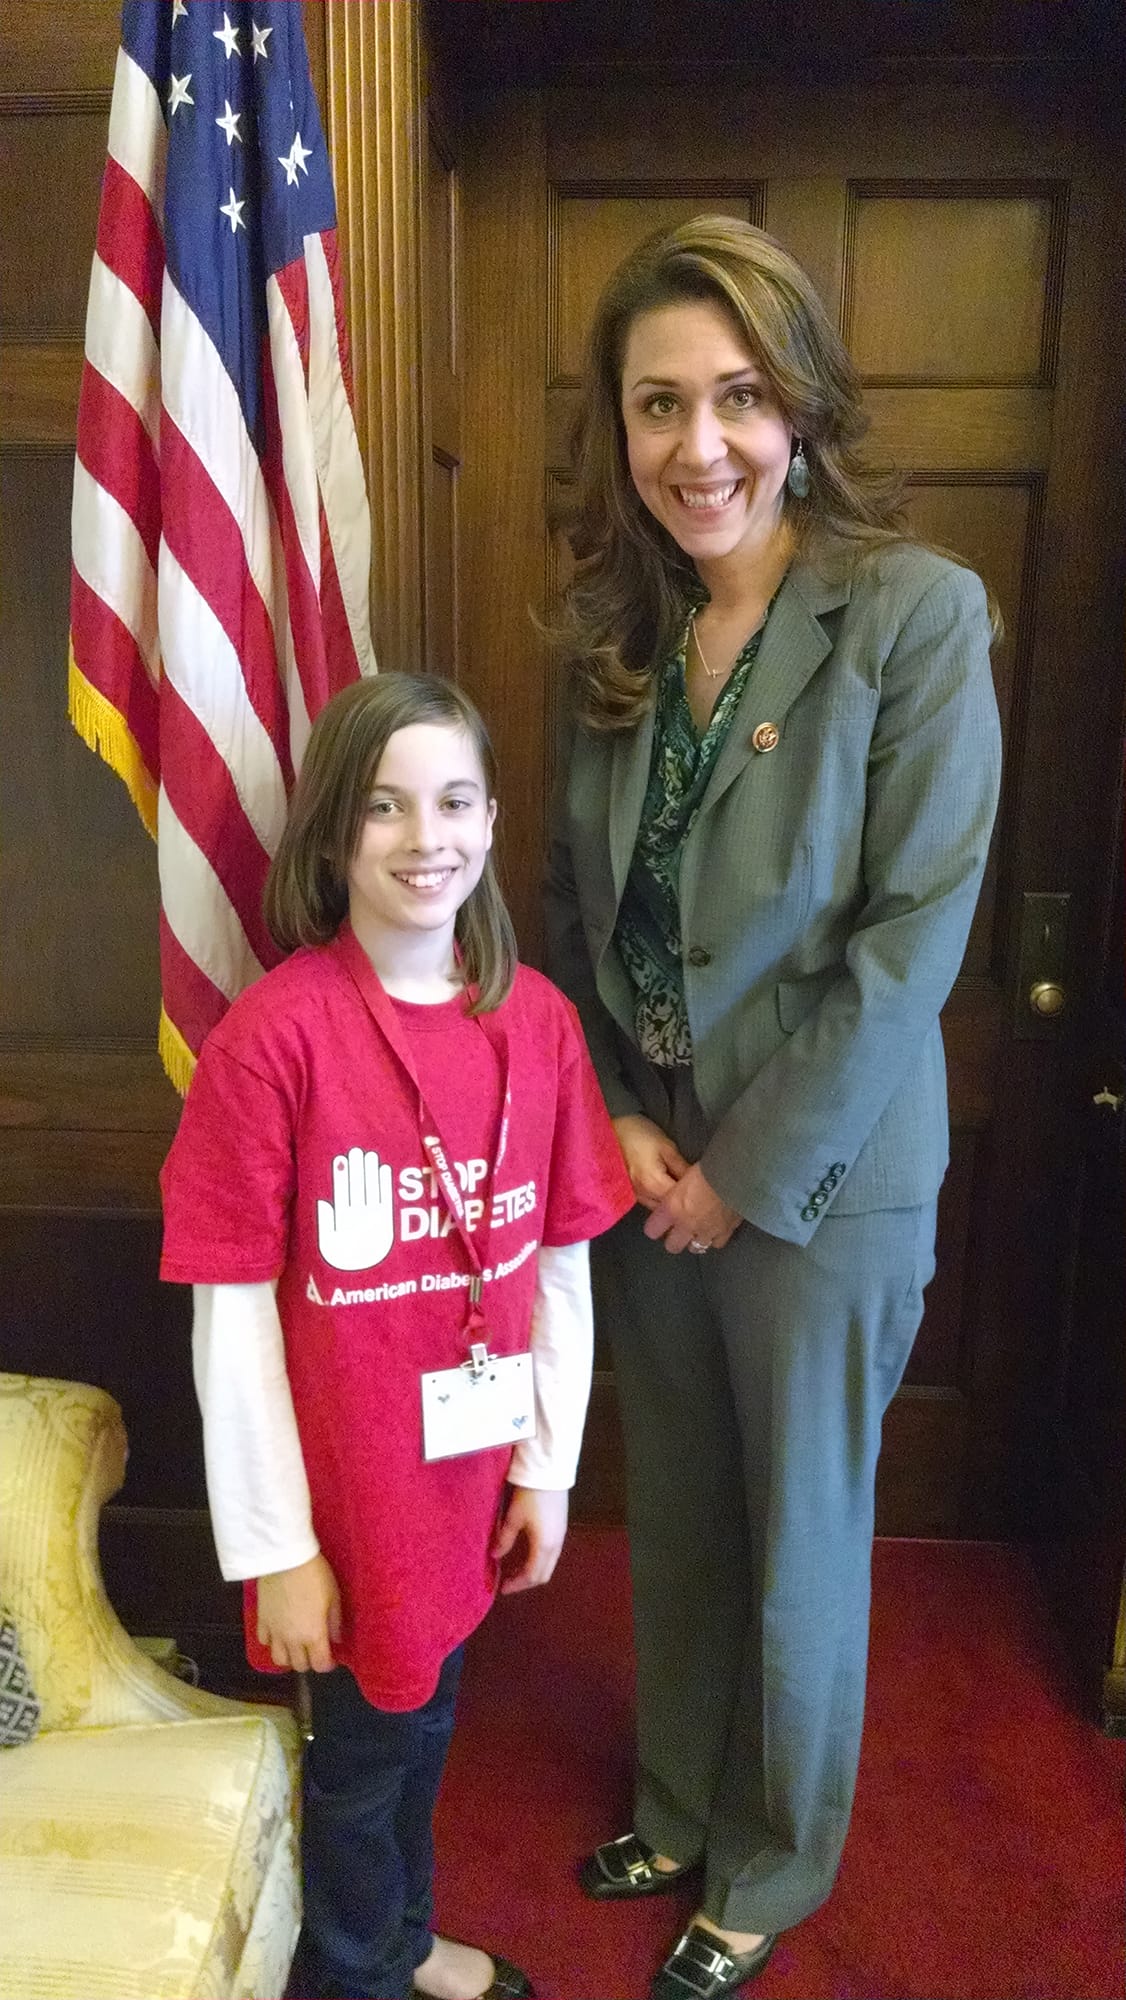 Washougal: Hathaway Elementary School student Paige Maas visits with U.S. Rep. Jaime Herrera Beutler during a March visit to the U.S.